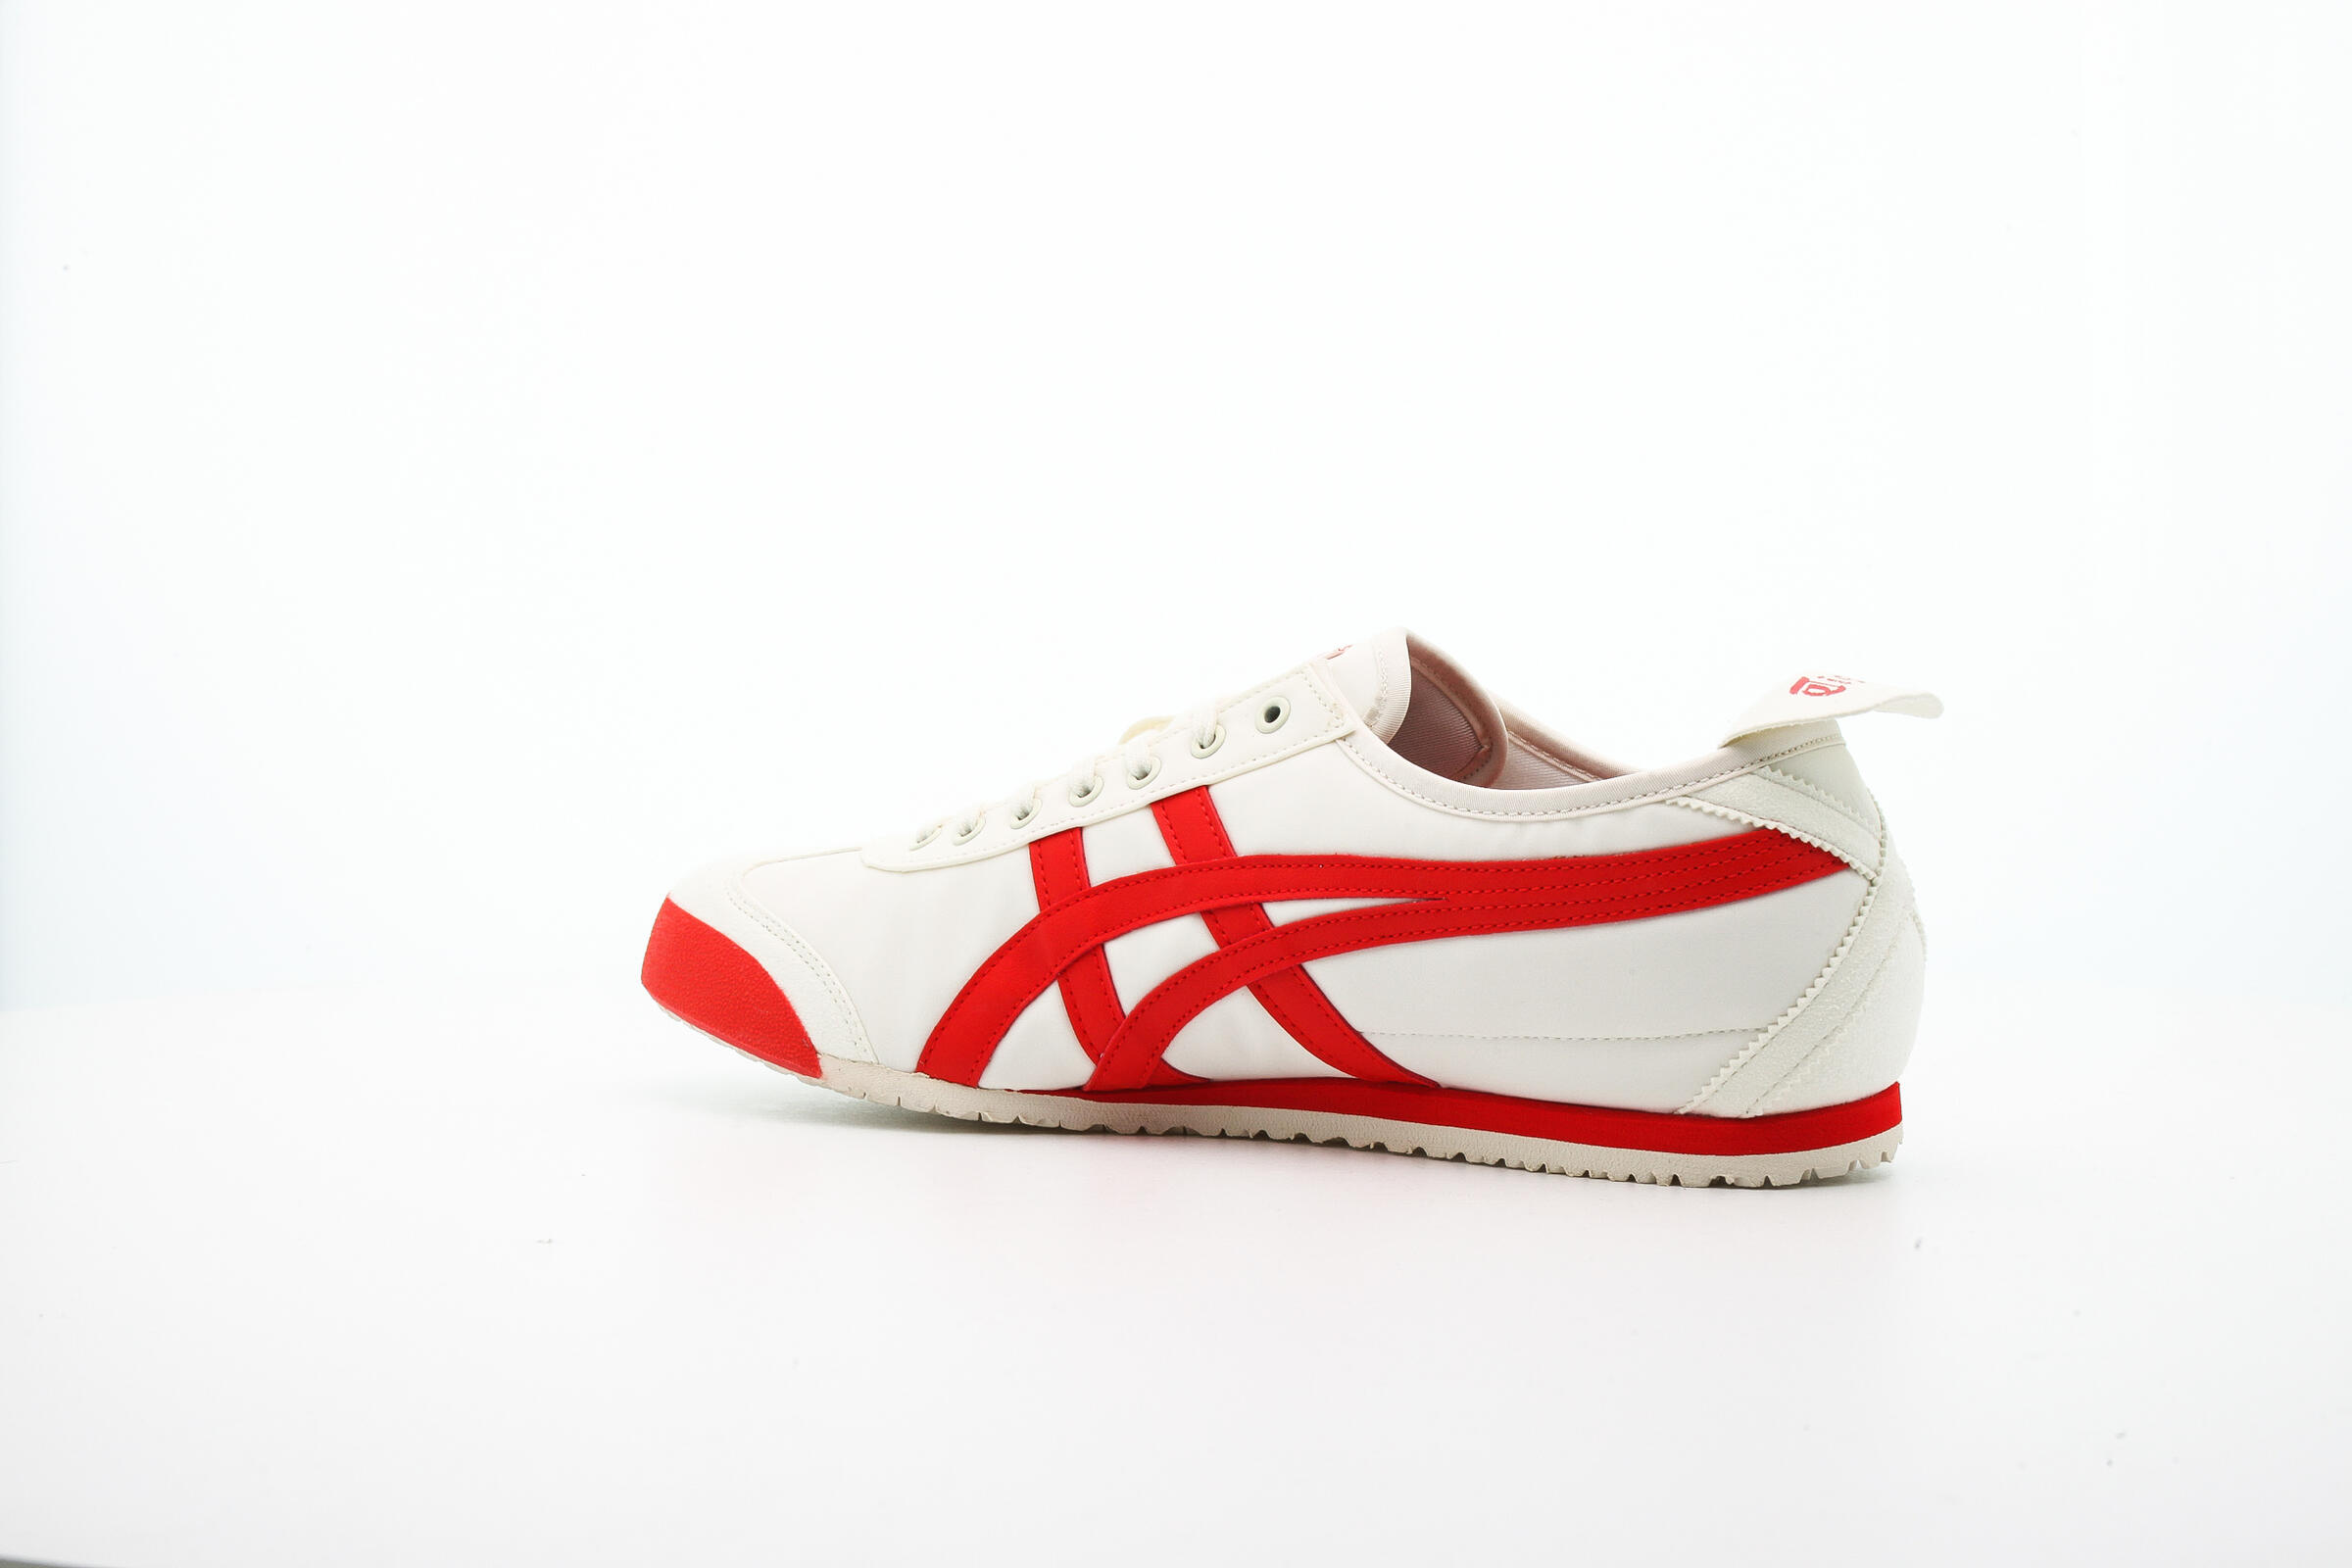 Onitsuka Tiger MEXICO 66 "FIERY RED"